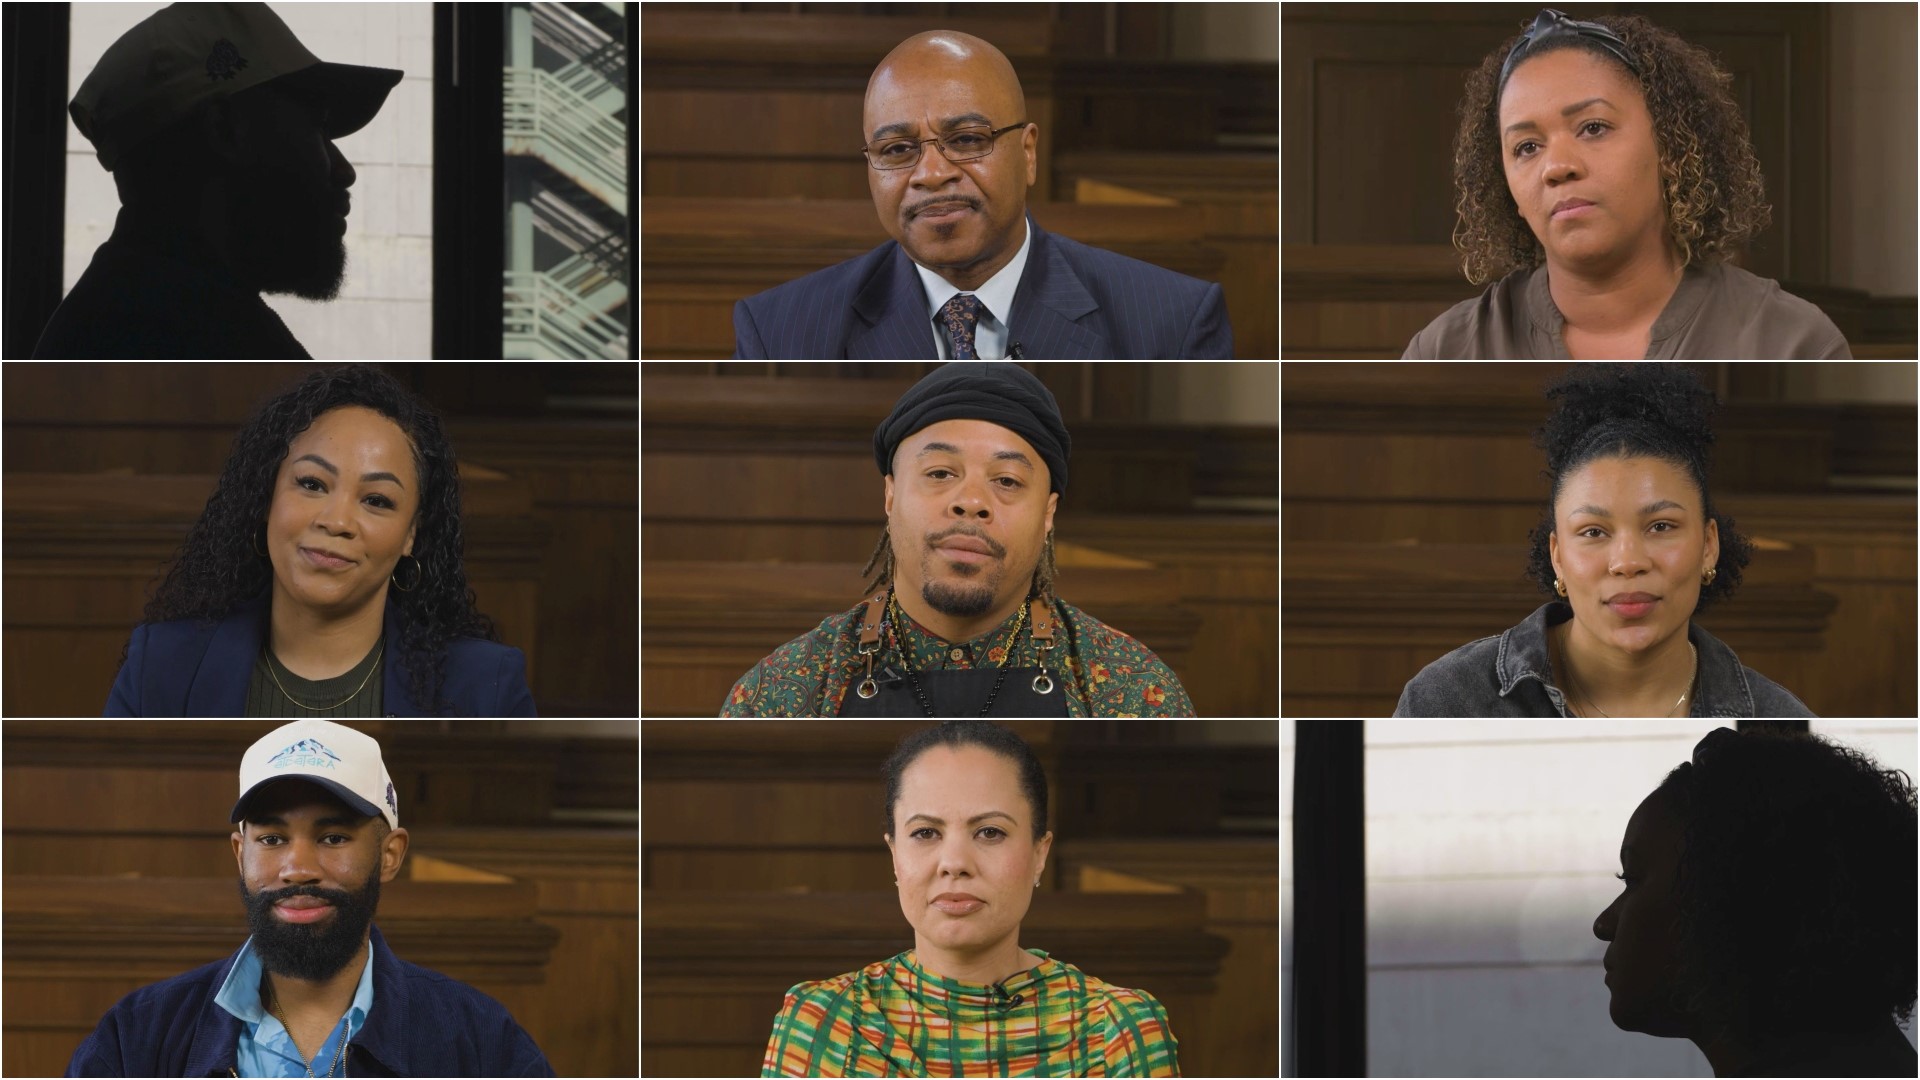 Community members reflect on their shared Black experience and how resilience has led to joy.